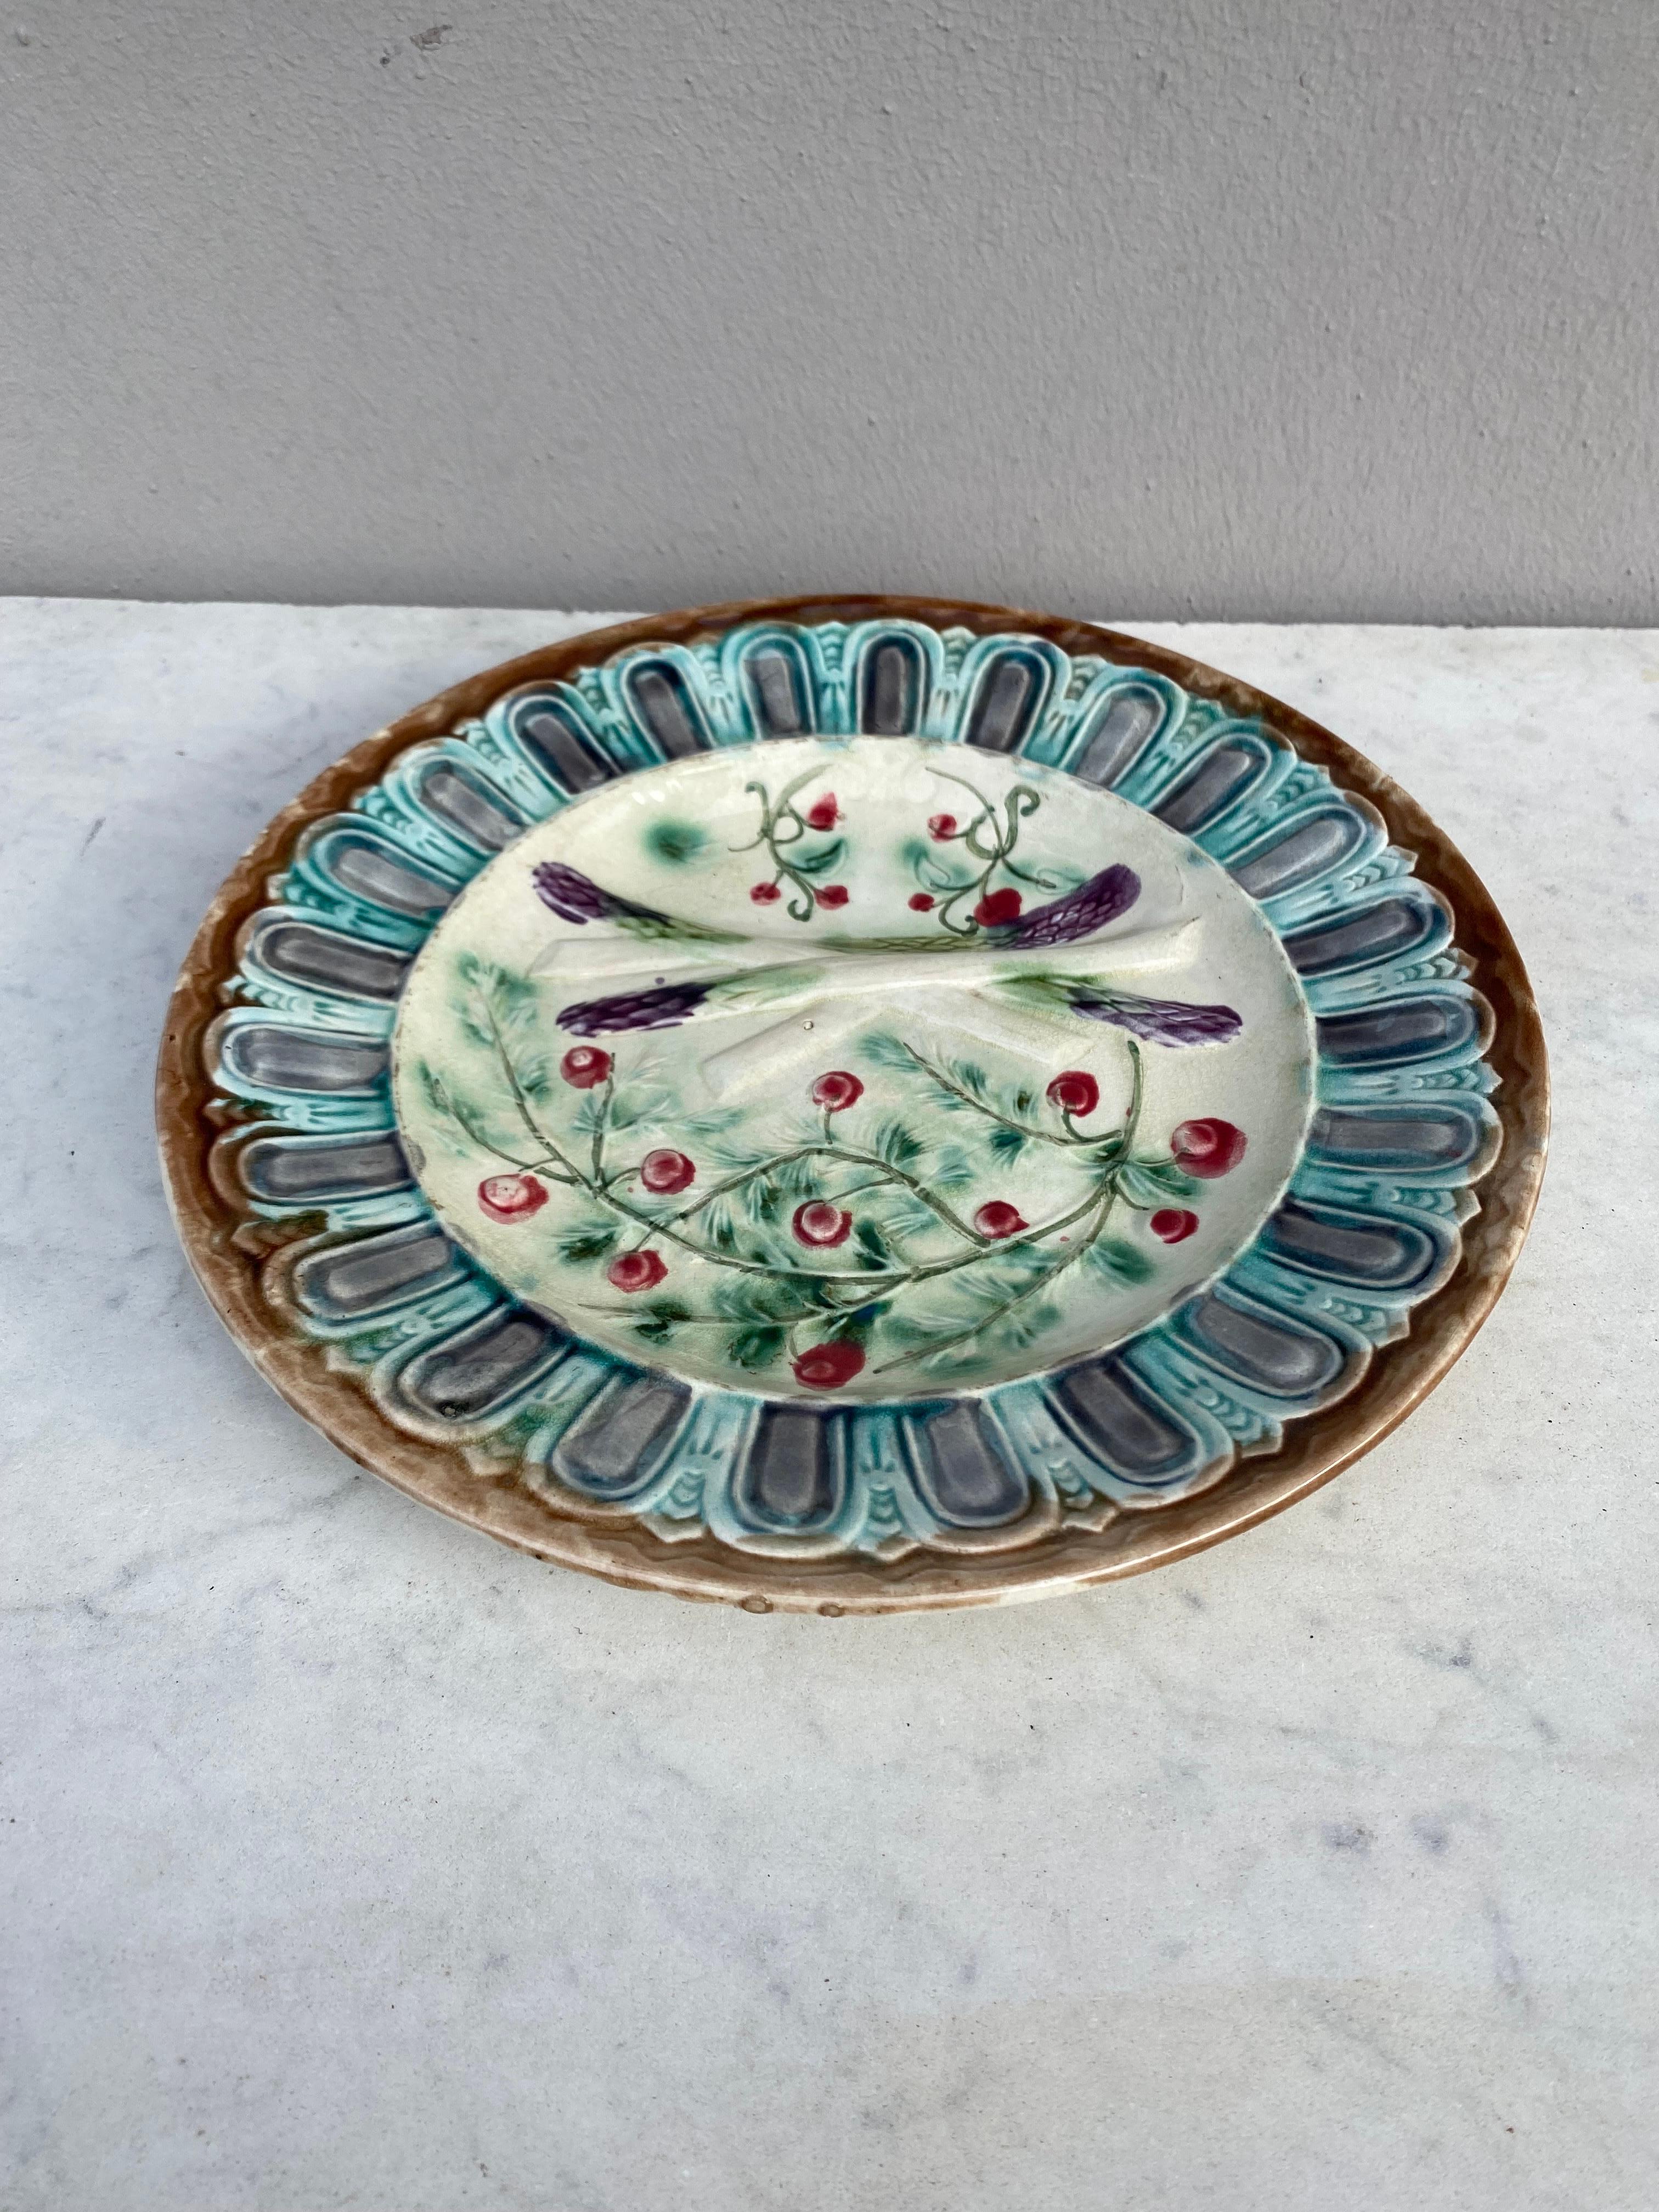 Unusual French Majolica asparagus plate attributed to Onnaing, circa 1890.
Decorated with berries.